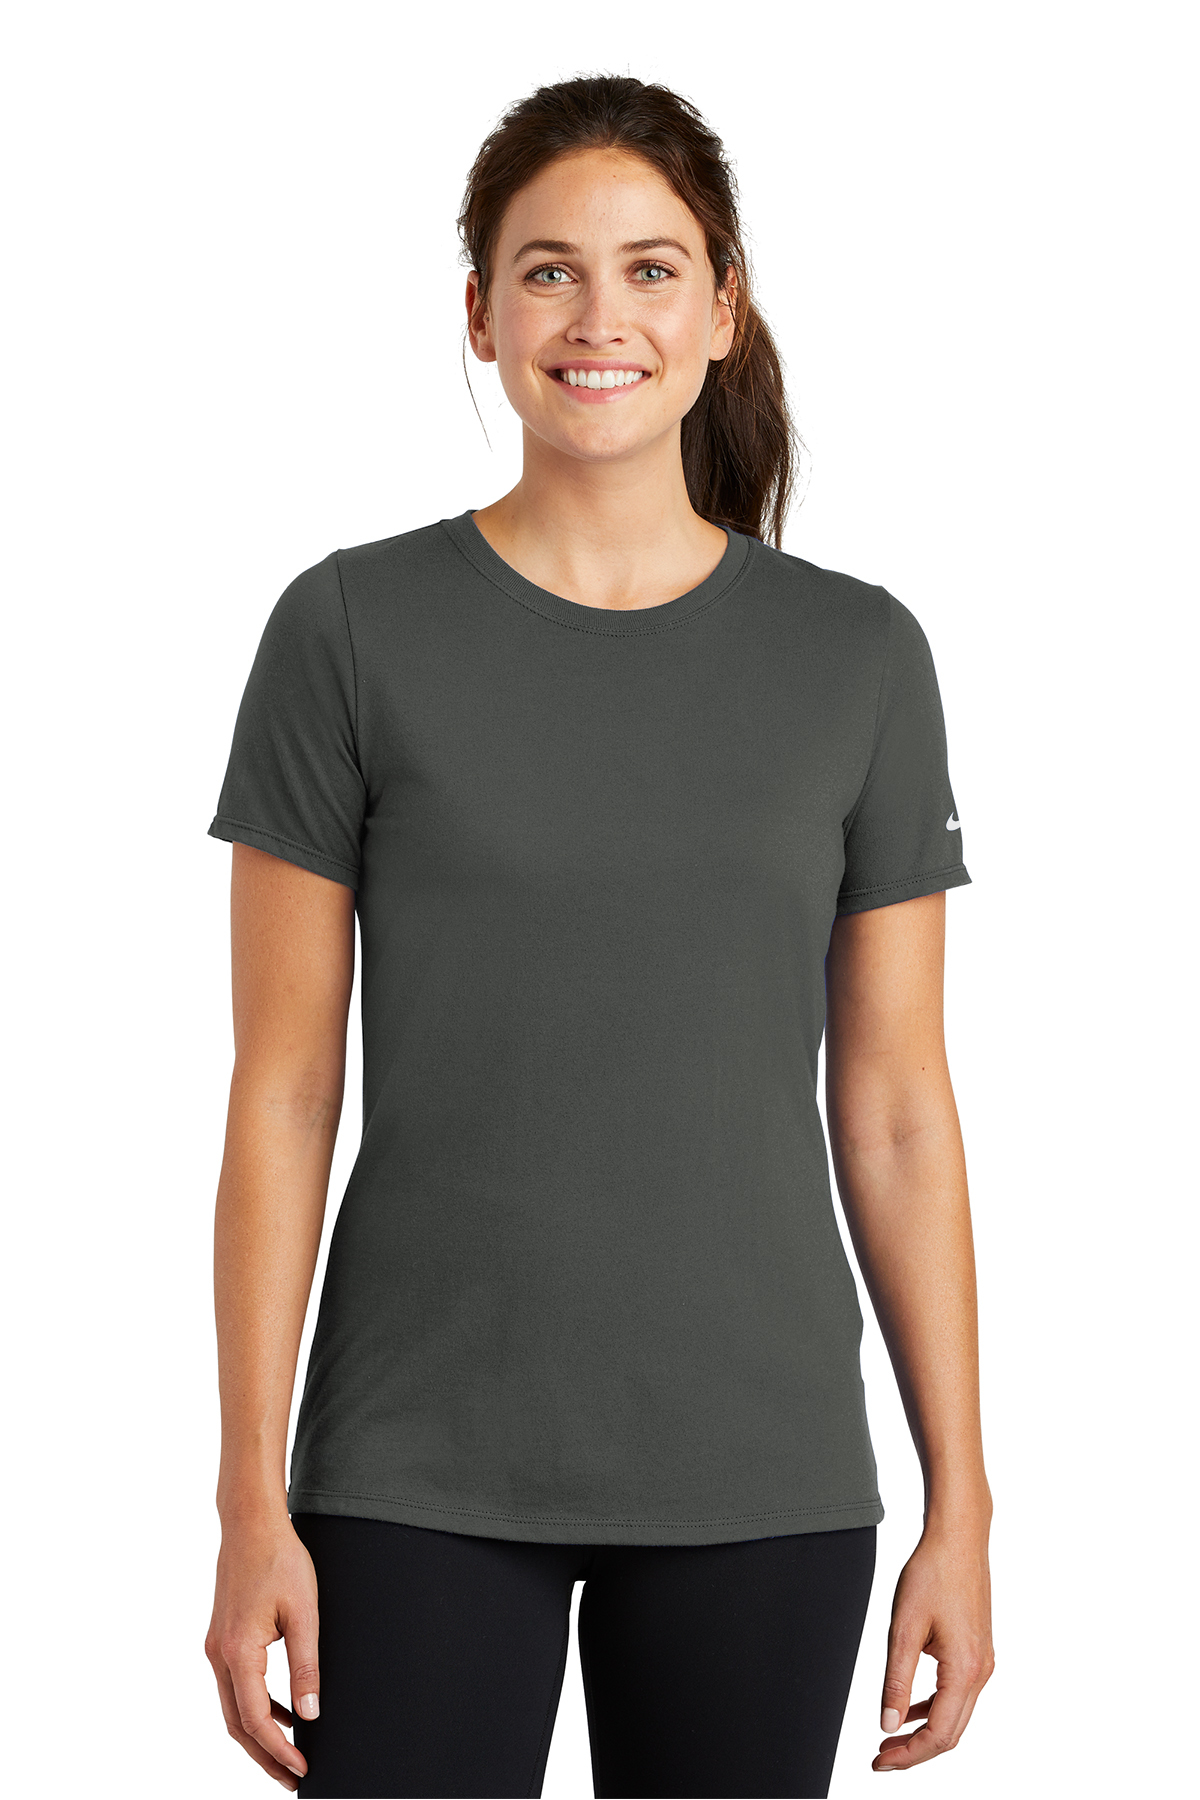 Nike Ladies Dri-FIT Cotton/Poly Scoop Neck Tee, Product